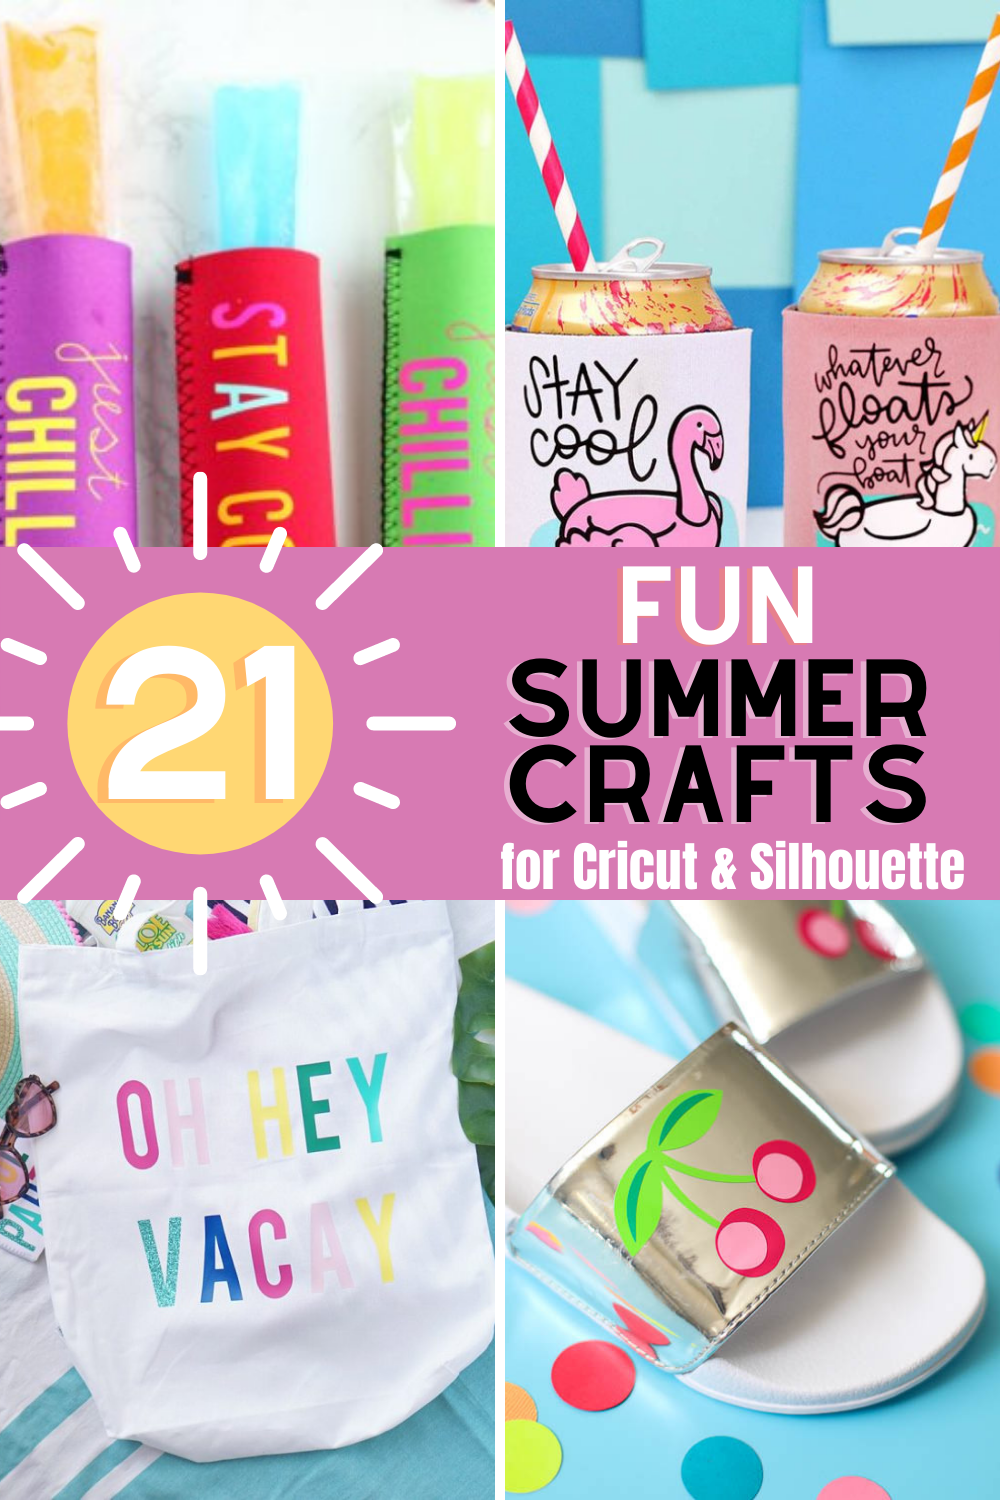 Silhouette and Cricut Crafts for Summer